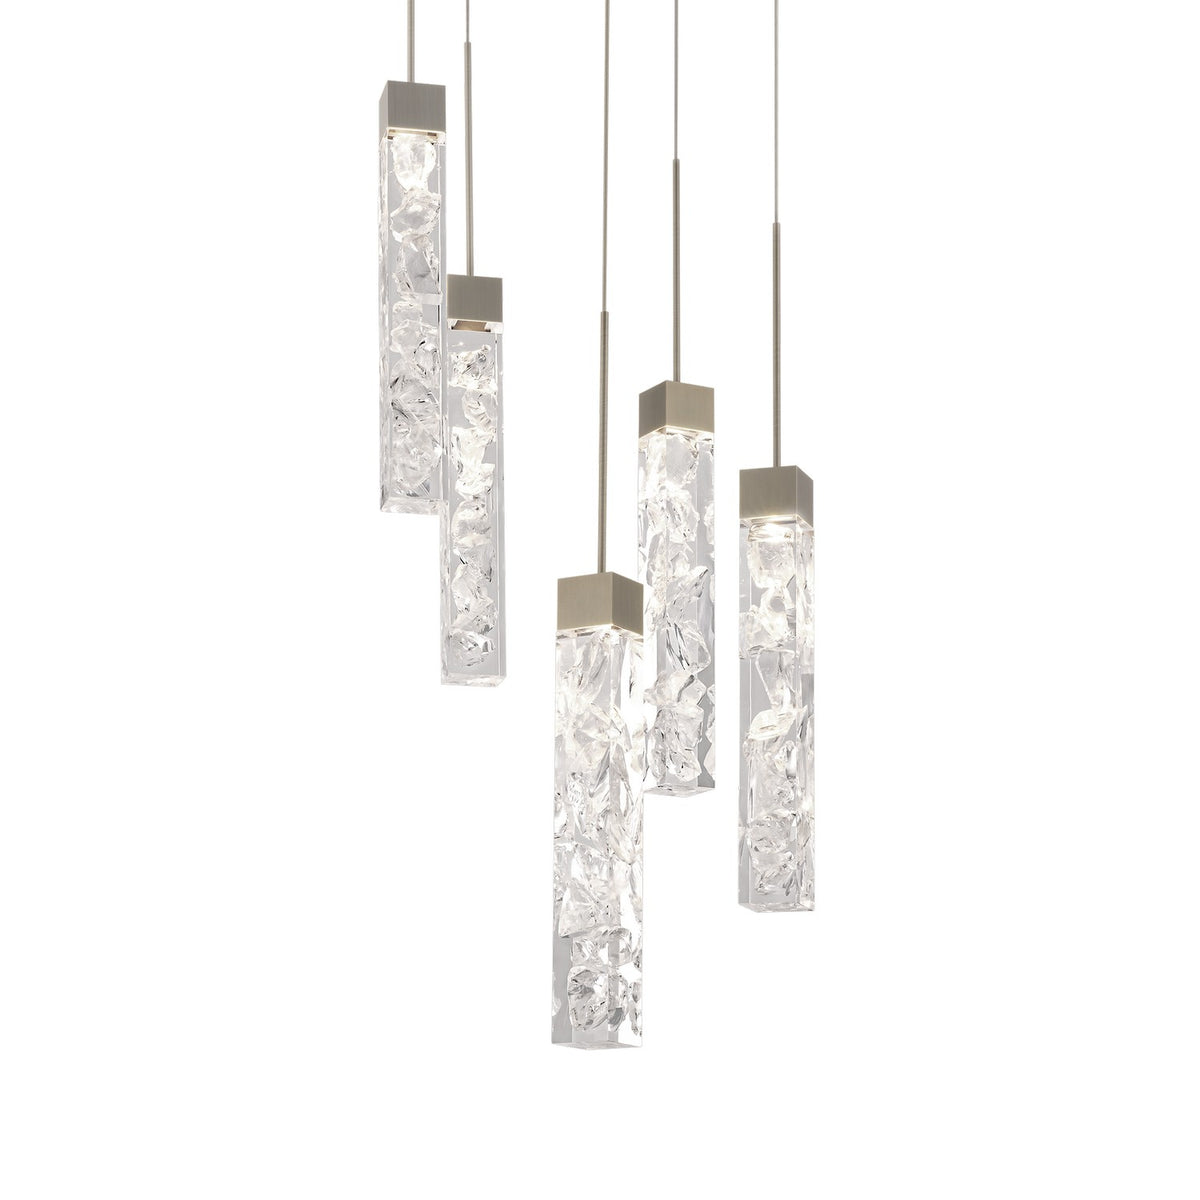 Modern Forms Canada - PD-78005R-AN - LED Pendant - Minx - Antique Nickel